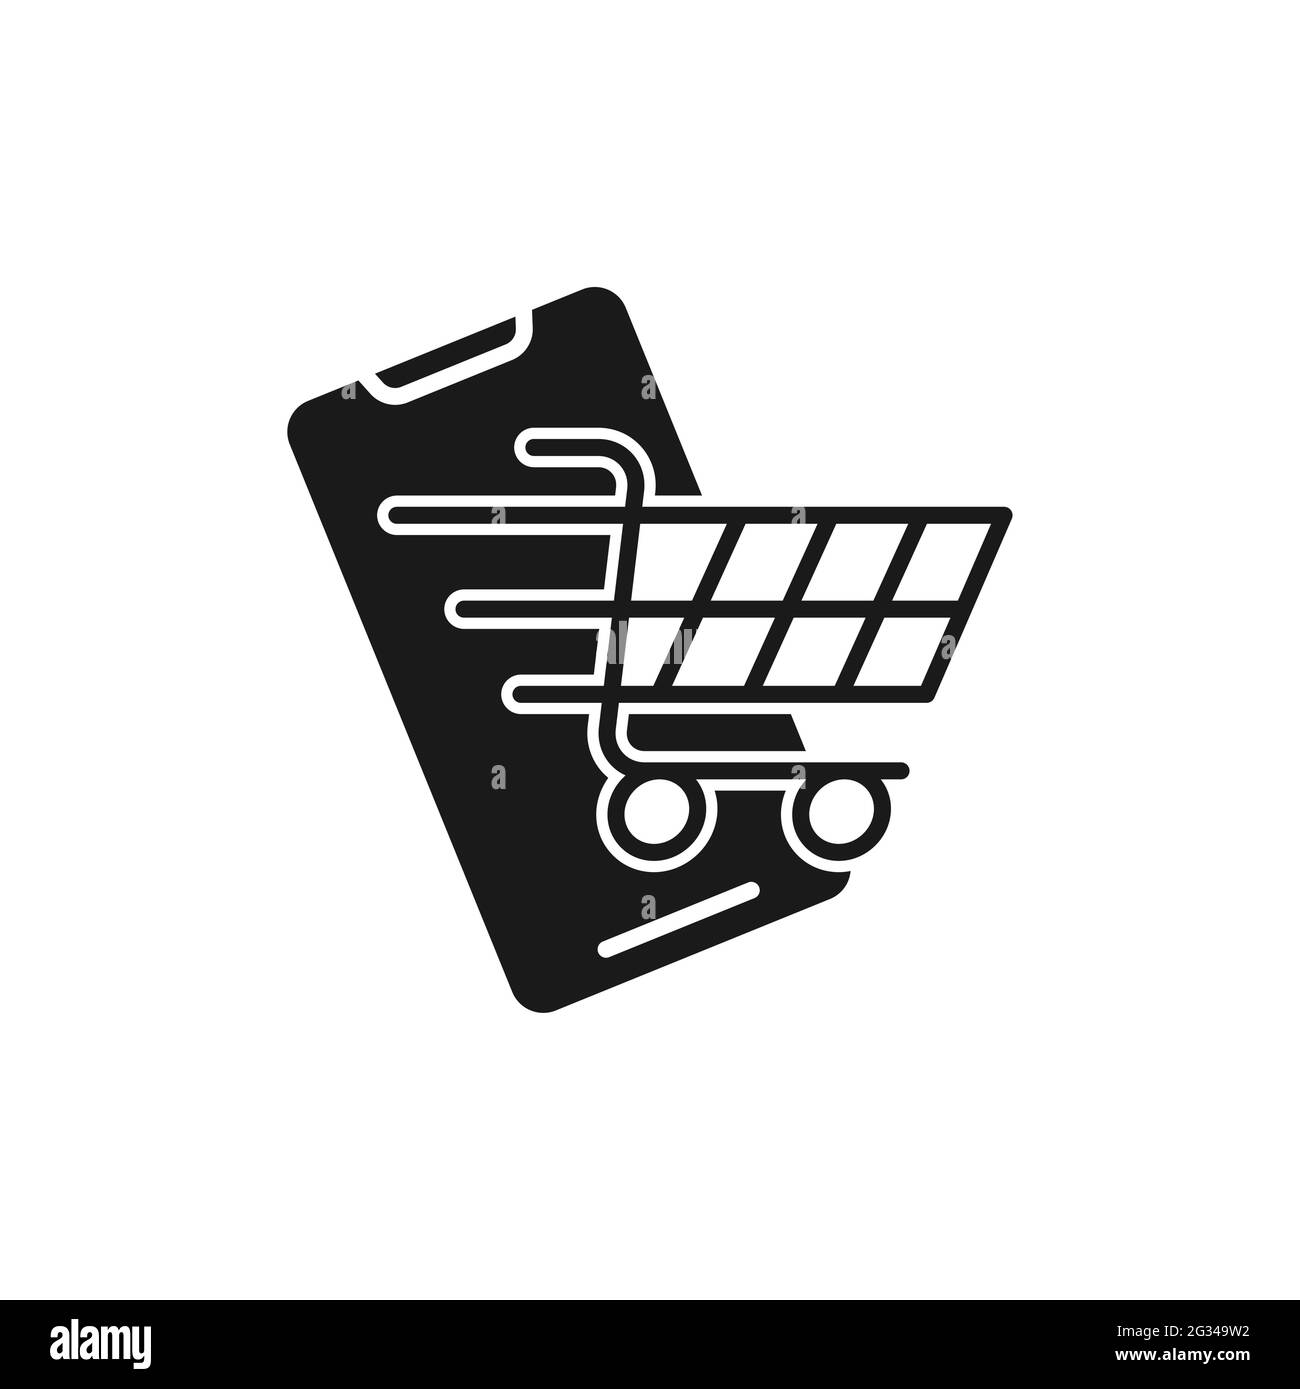 Shopping Cart with mobile phone icon Vector Design. Shopping Cart icon with  smartphone design concept for e-commerce, online store and marketplace web  Stock Vector Image & Art - Alamy